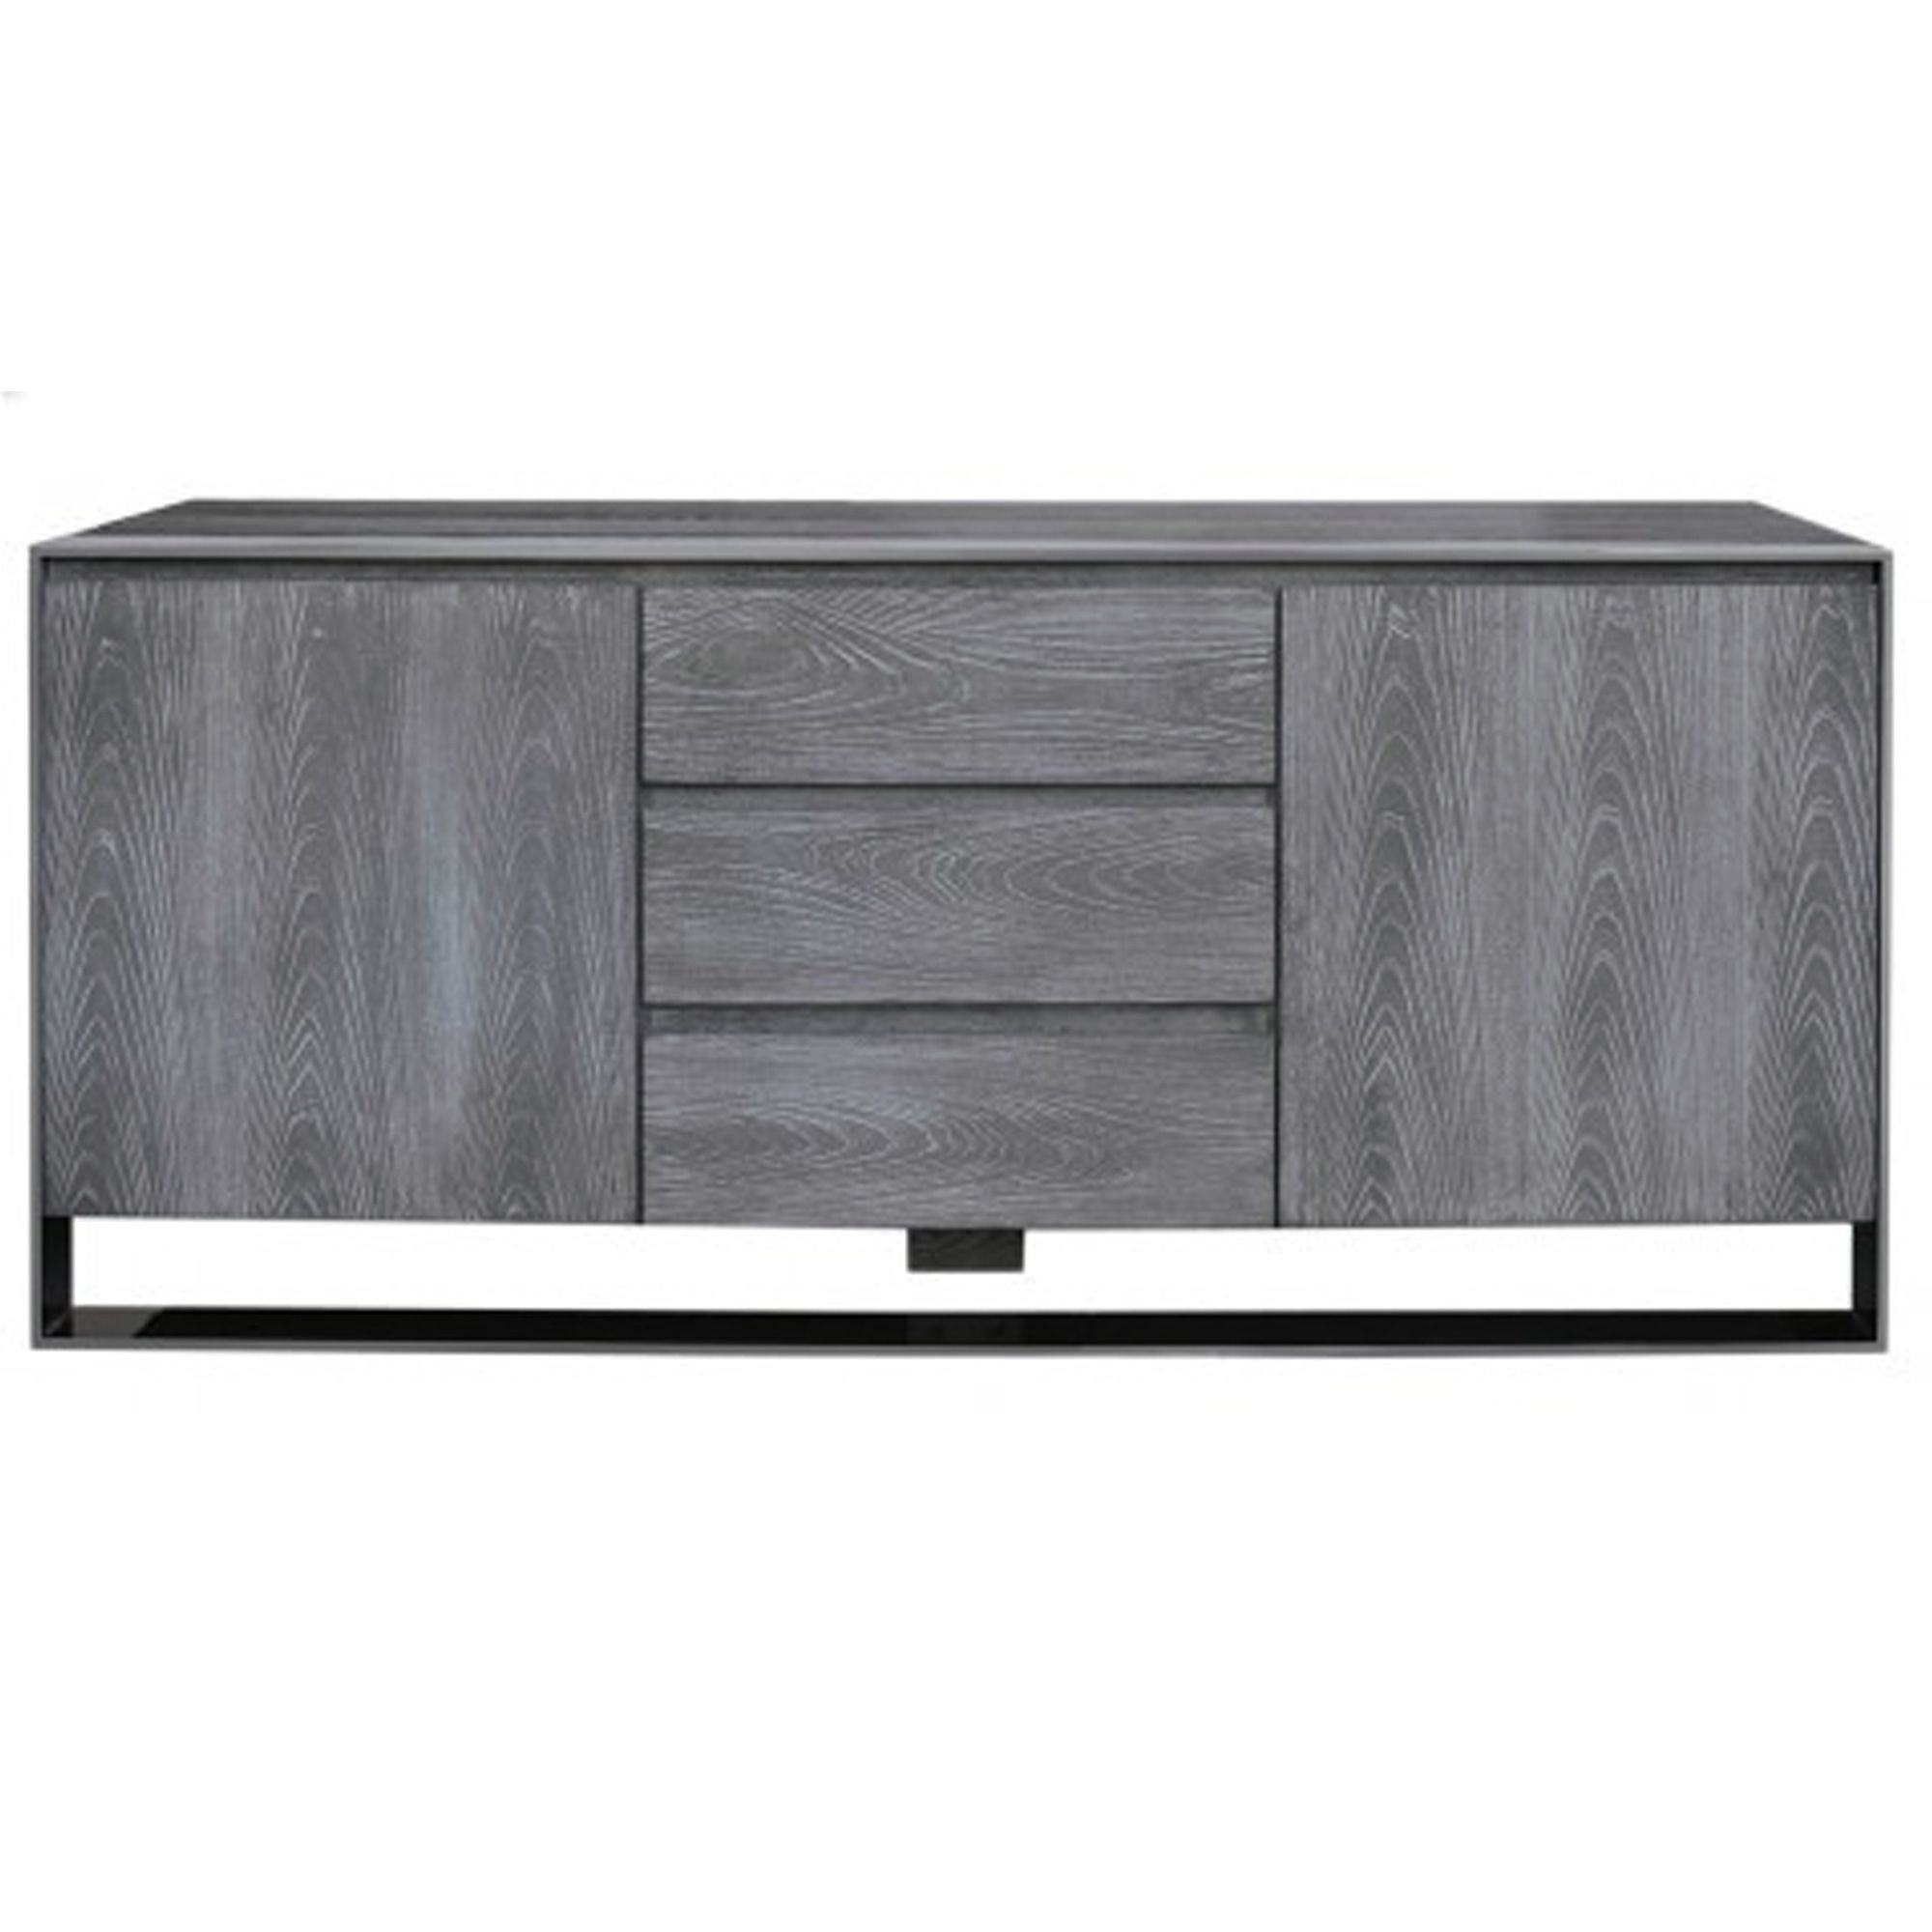 Grey Wooden Sideboard | Wooden Furniture | Sideboards Pertaining To Gray Wooden Sideboards (Gallery 7 of 20)